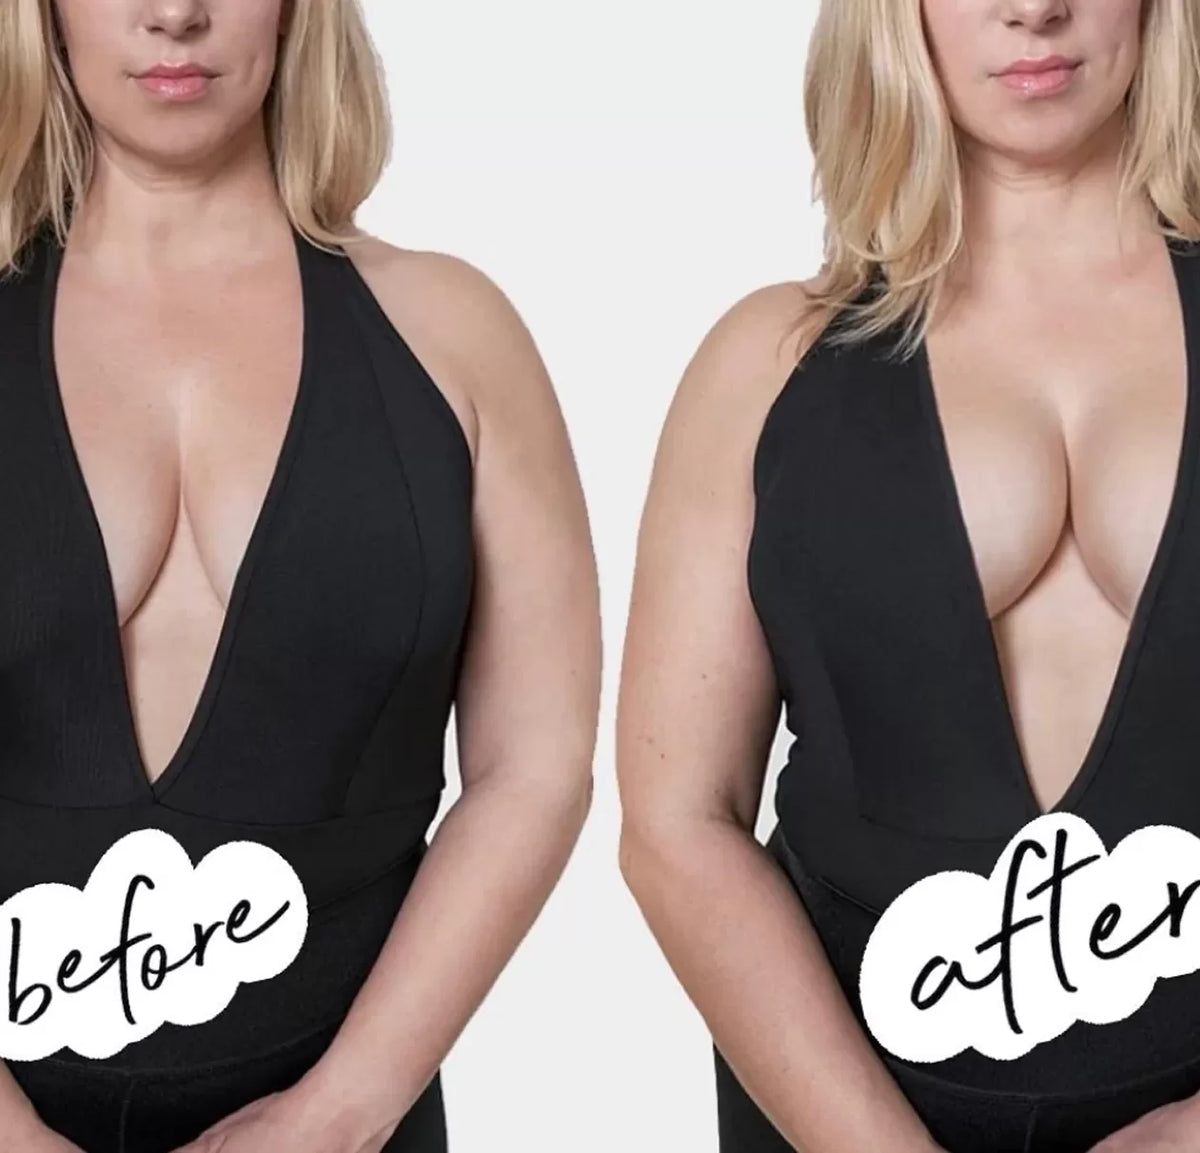 Lovely in Lace Breast Tape demo (before and after)